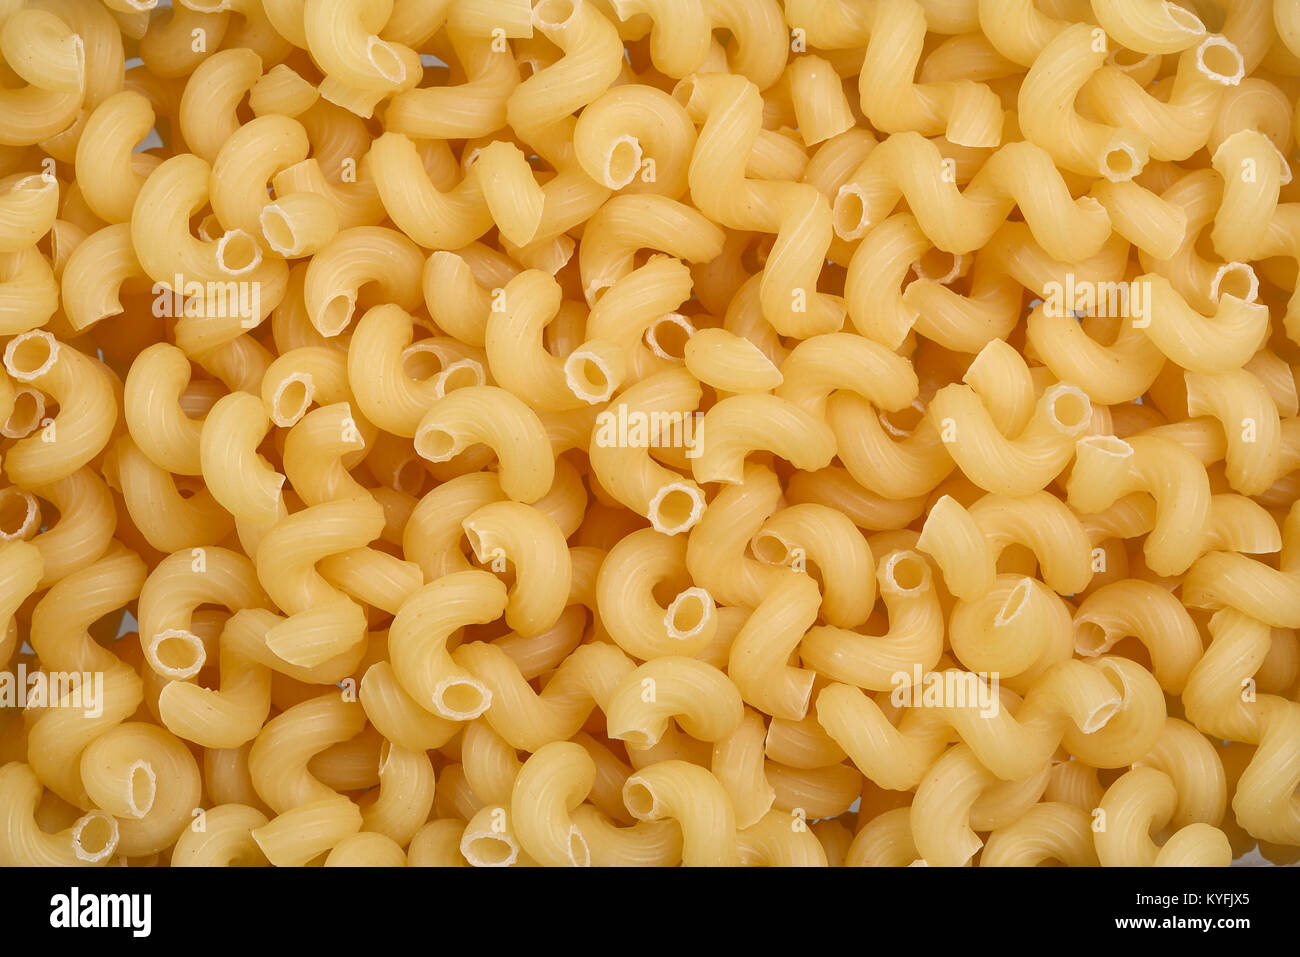 Abstract close up detail of dried macaroni pasta Stock Photo